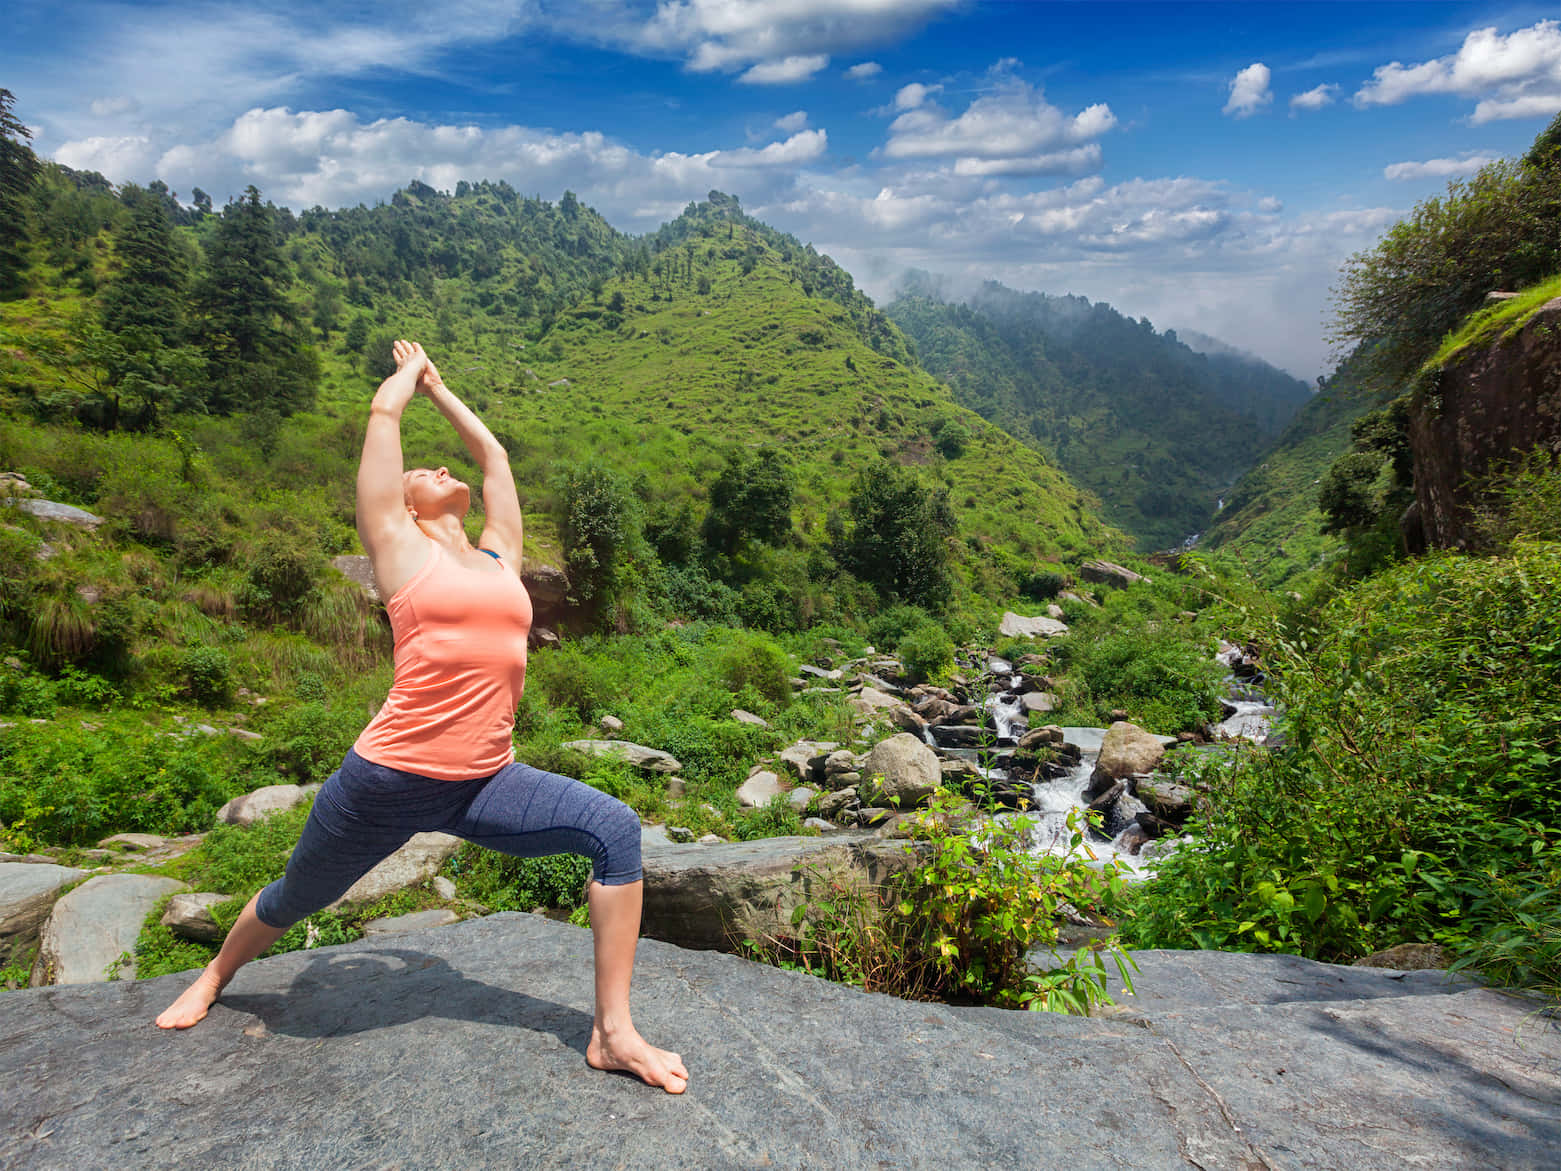 Find peace and harmony through the practice of yoga